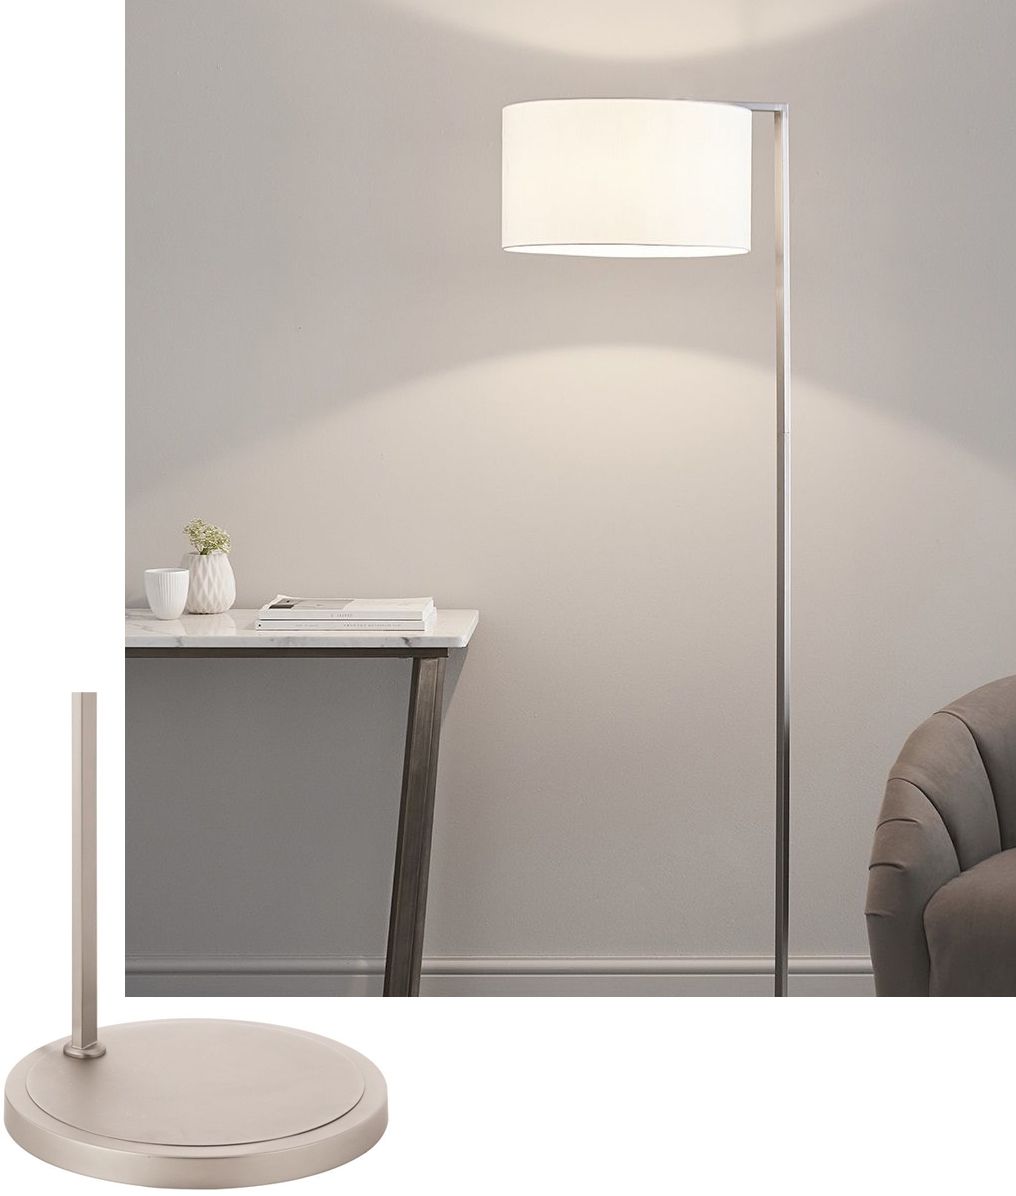 Most Recent Matt Nickel Contemporary Floor Lamp With Fabric Drum Shade Throughout White Shade Floor Lamps (View 1 of 15)